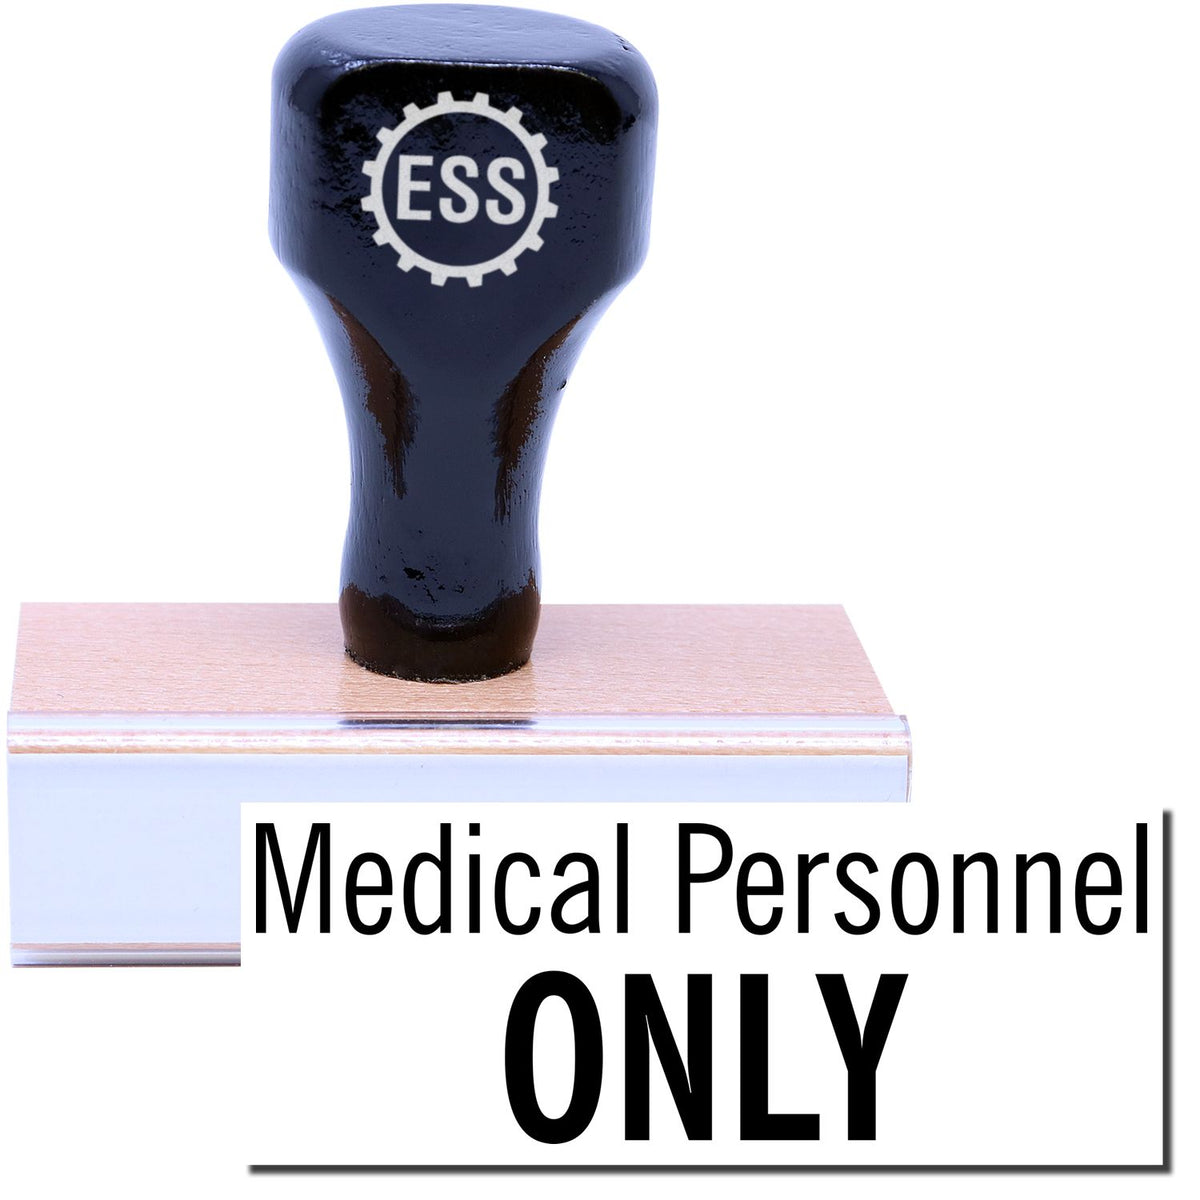 A stock office medical rubber stamp with a stamped image showing how the text &quot;Medical Personnel ONLY&quot; is displayed after stamping.